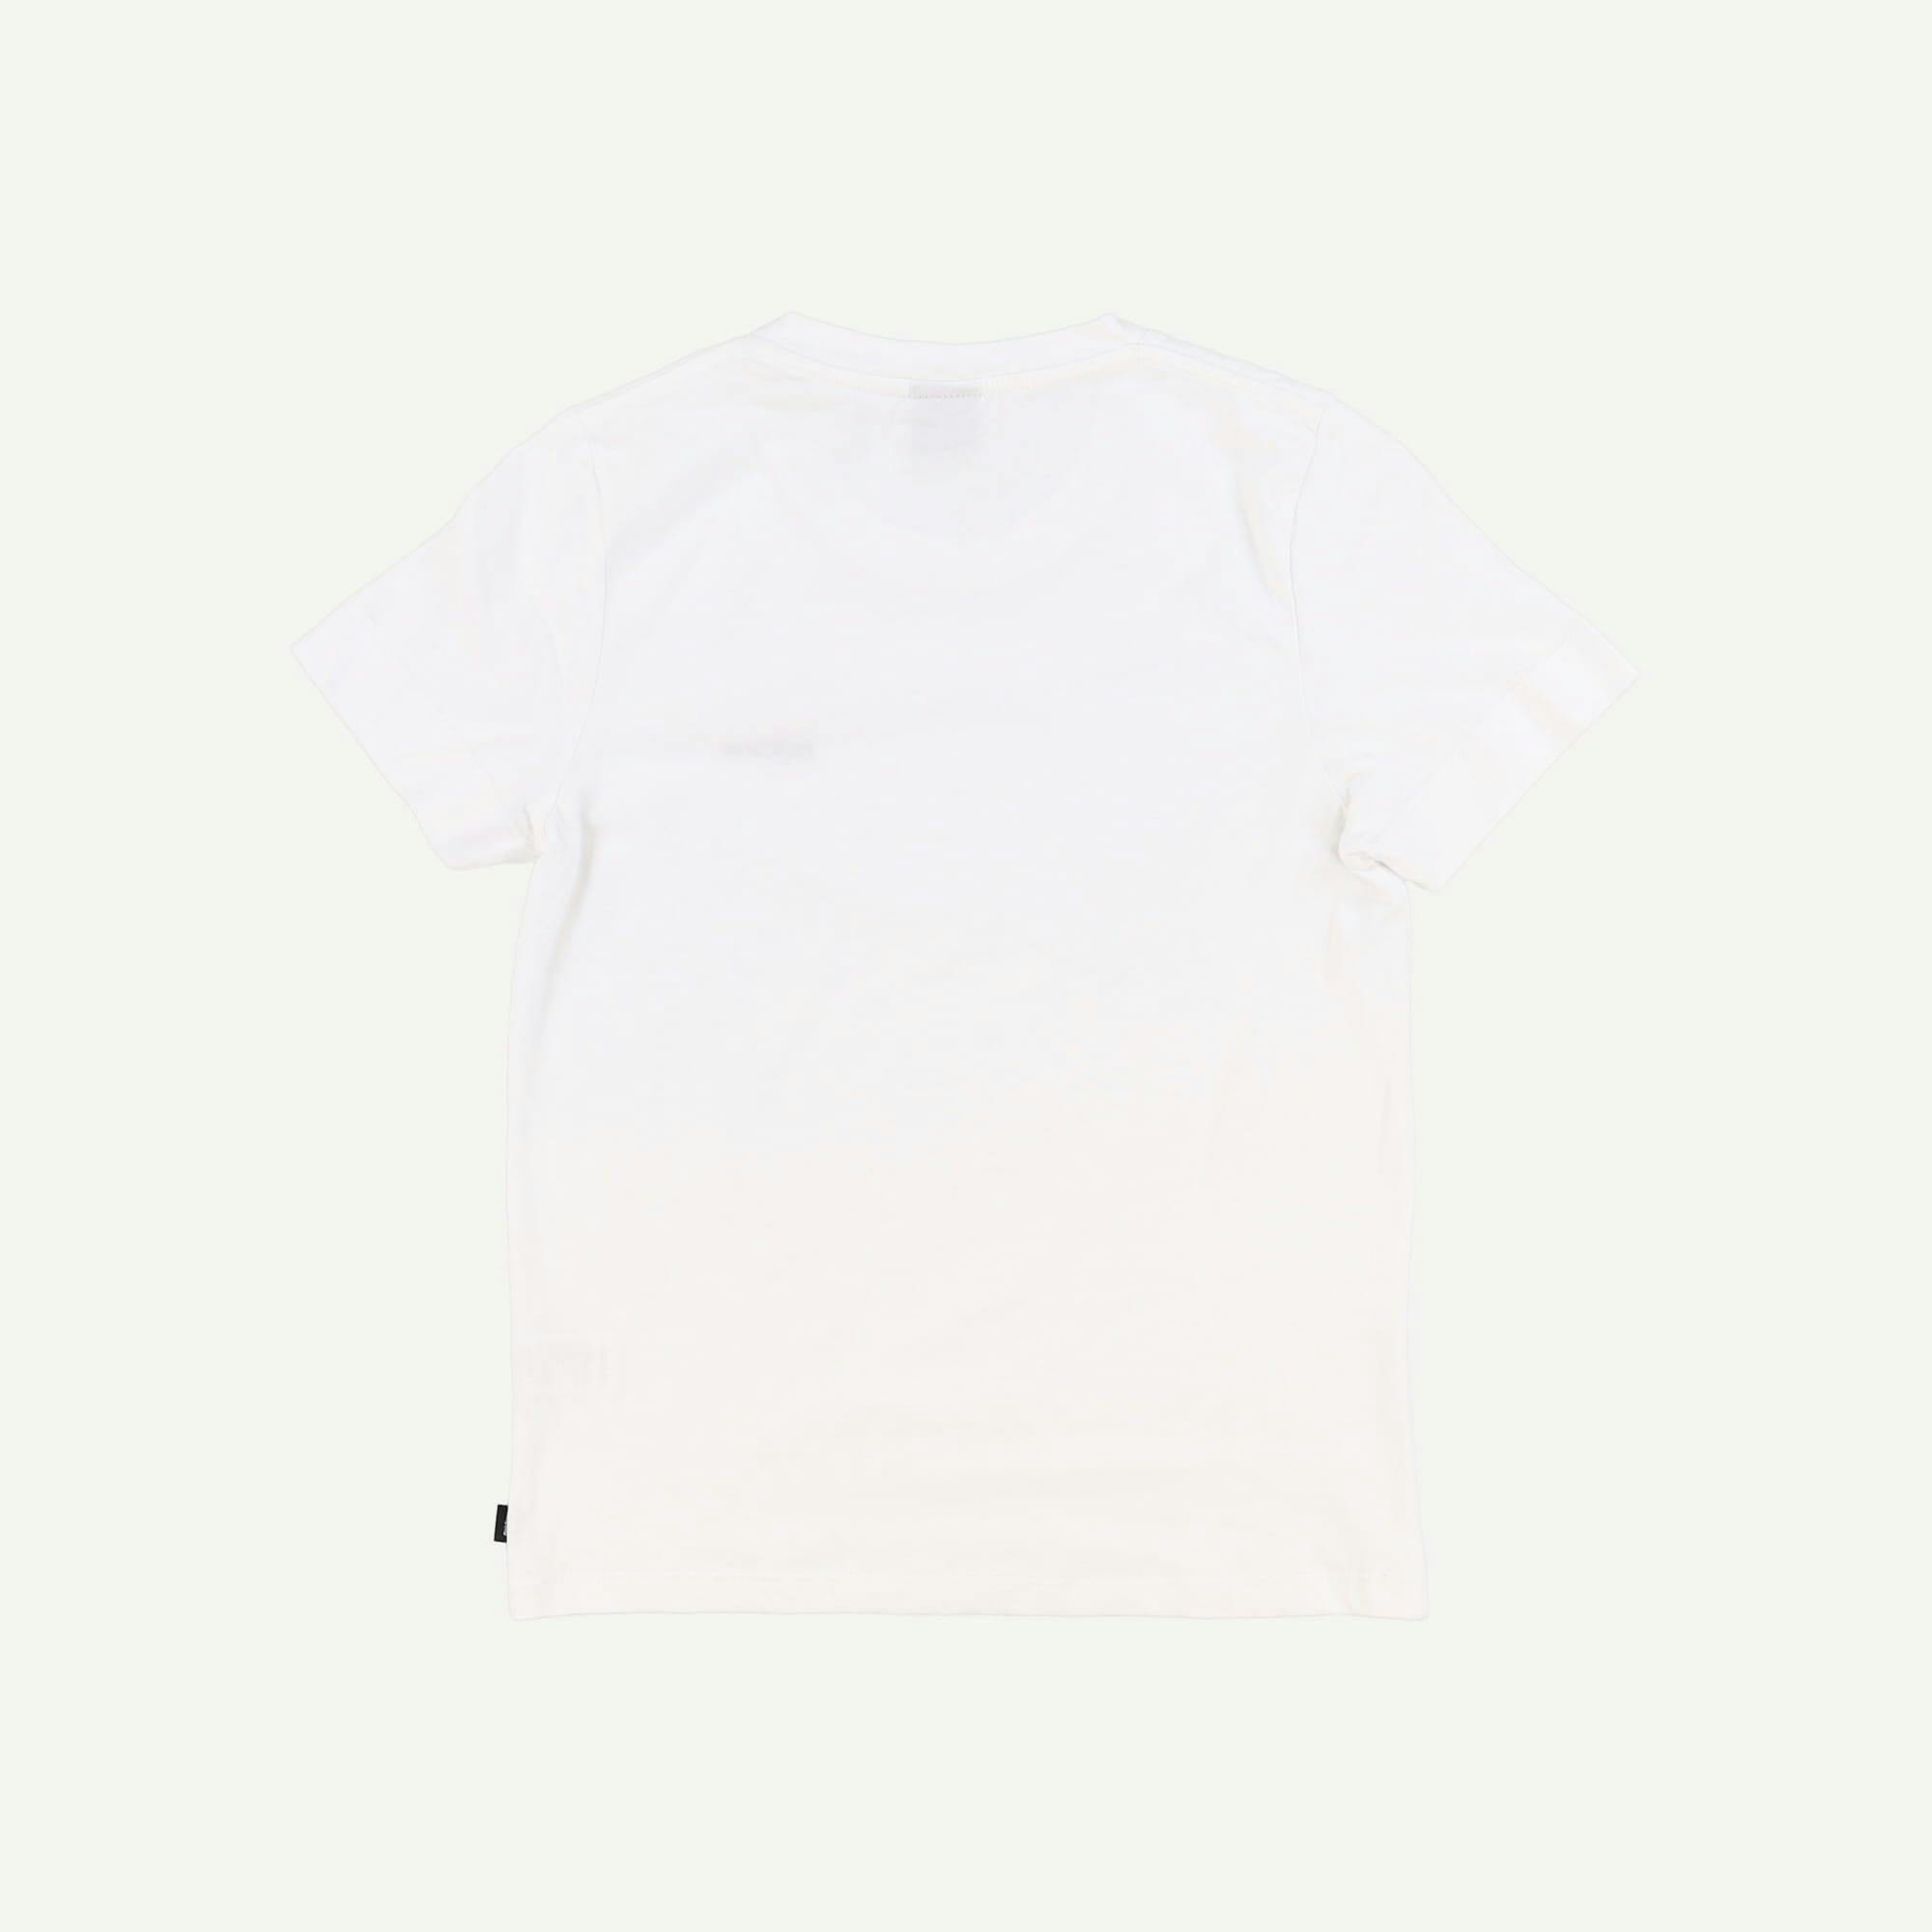 Finisterre As new White T-shirt